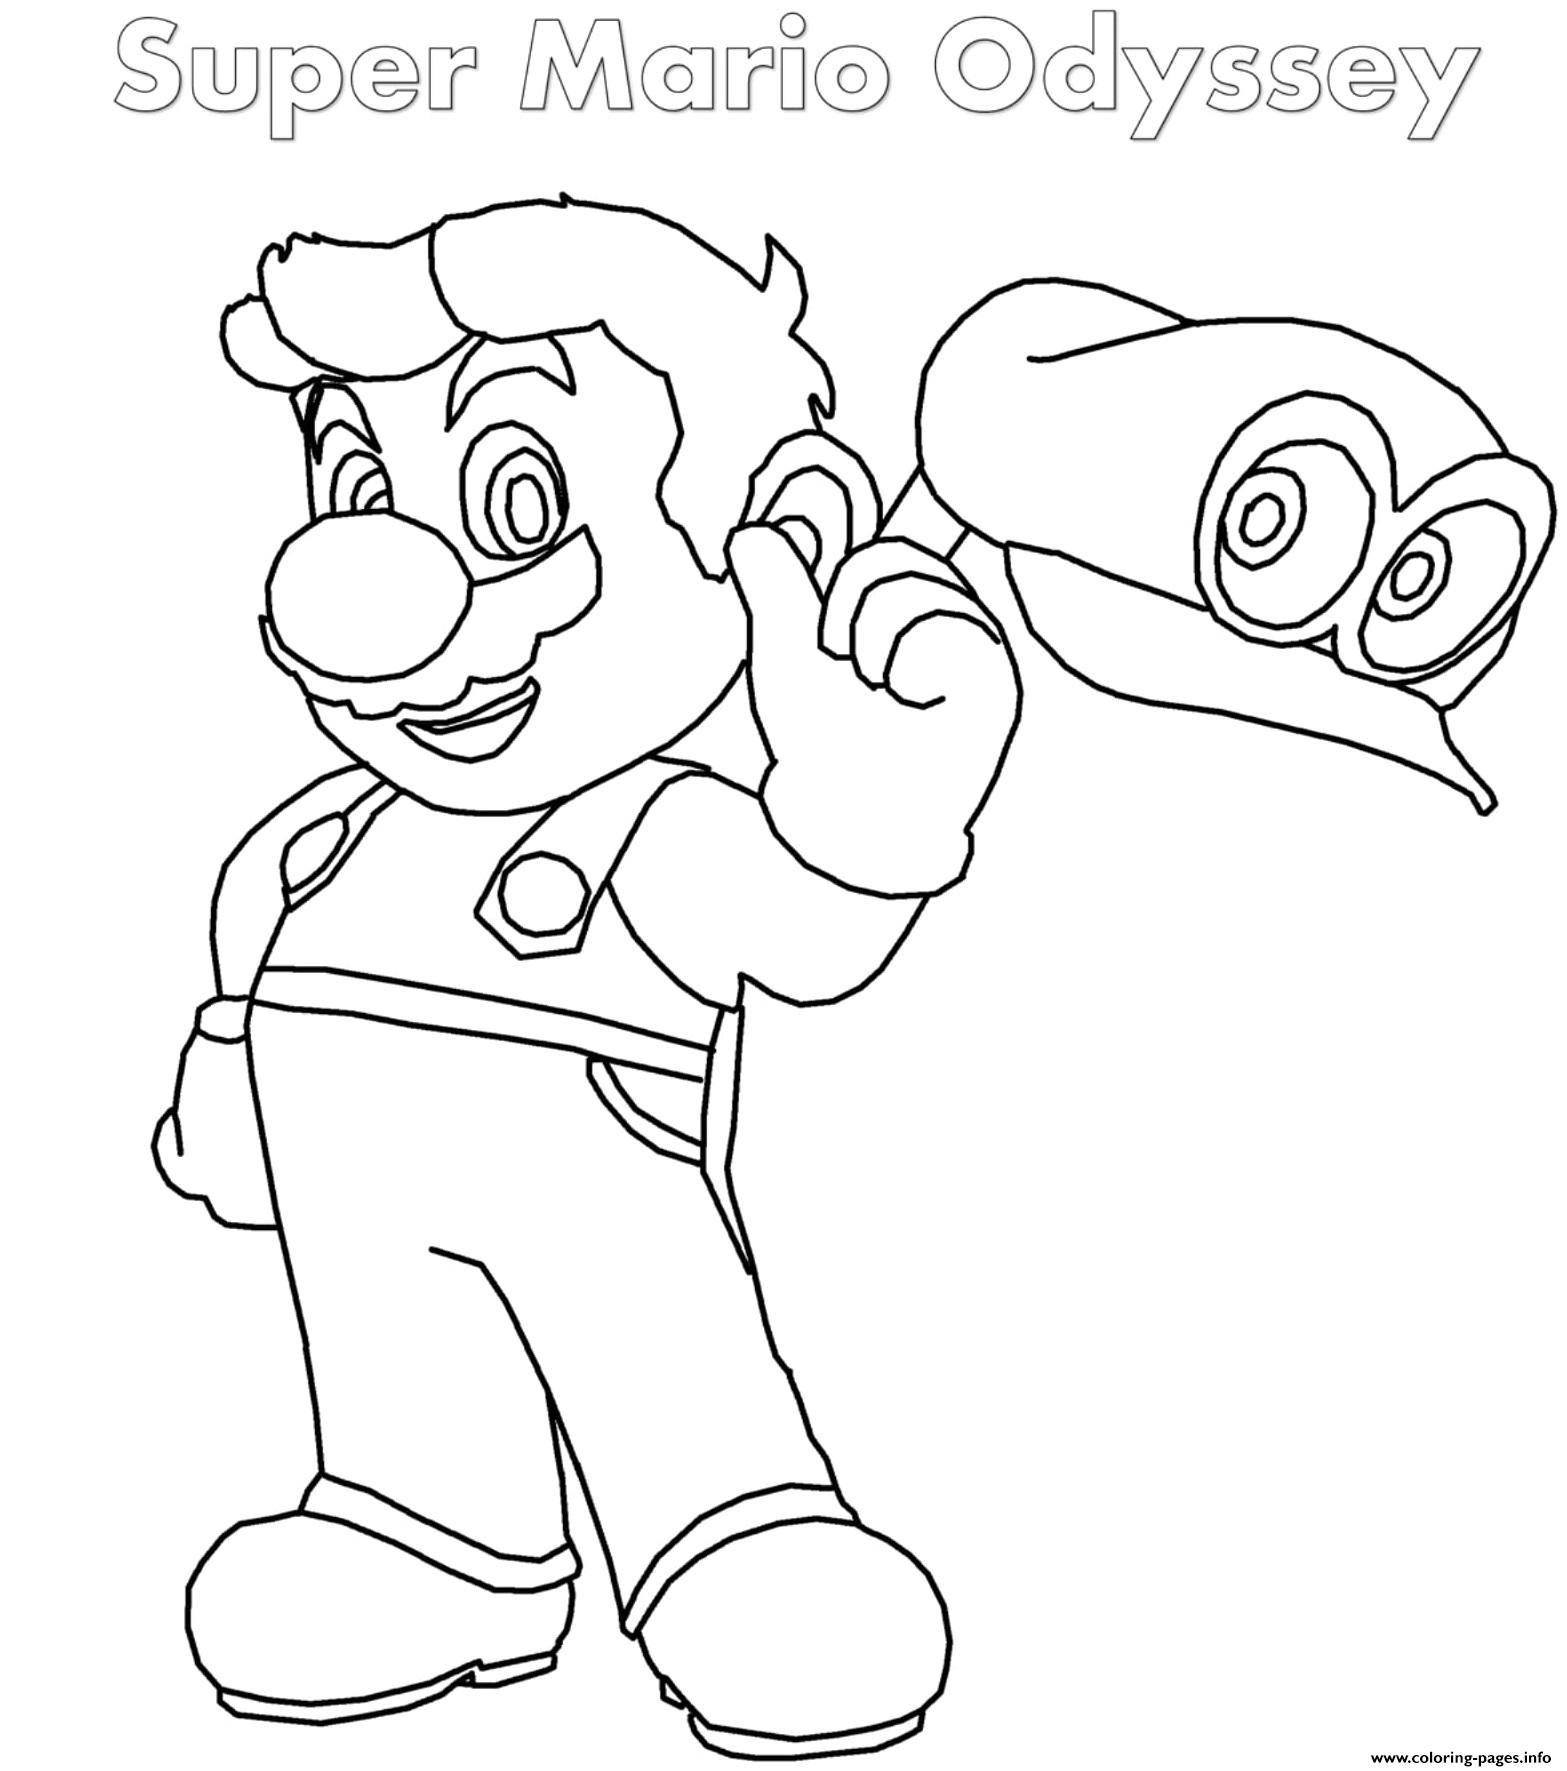 Super Mario Odyssey Coloring Pages Printable